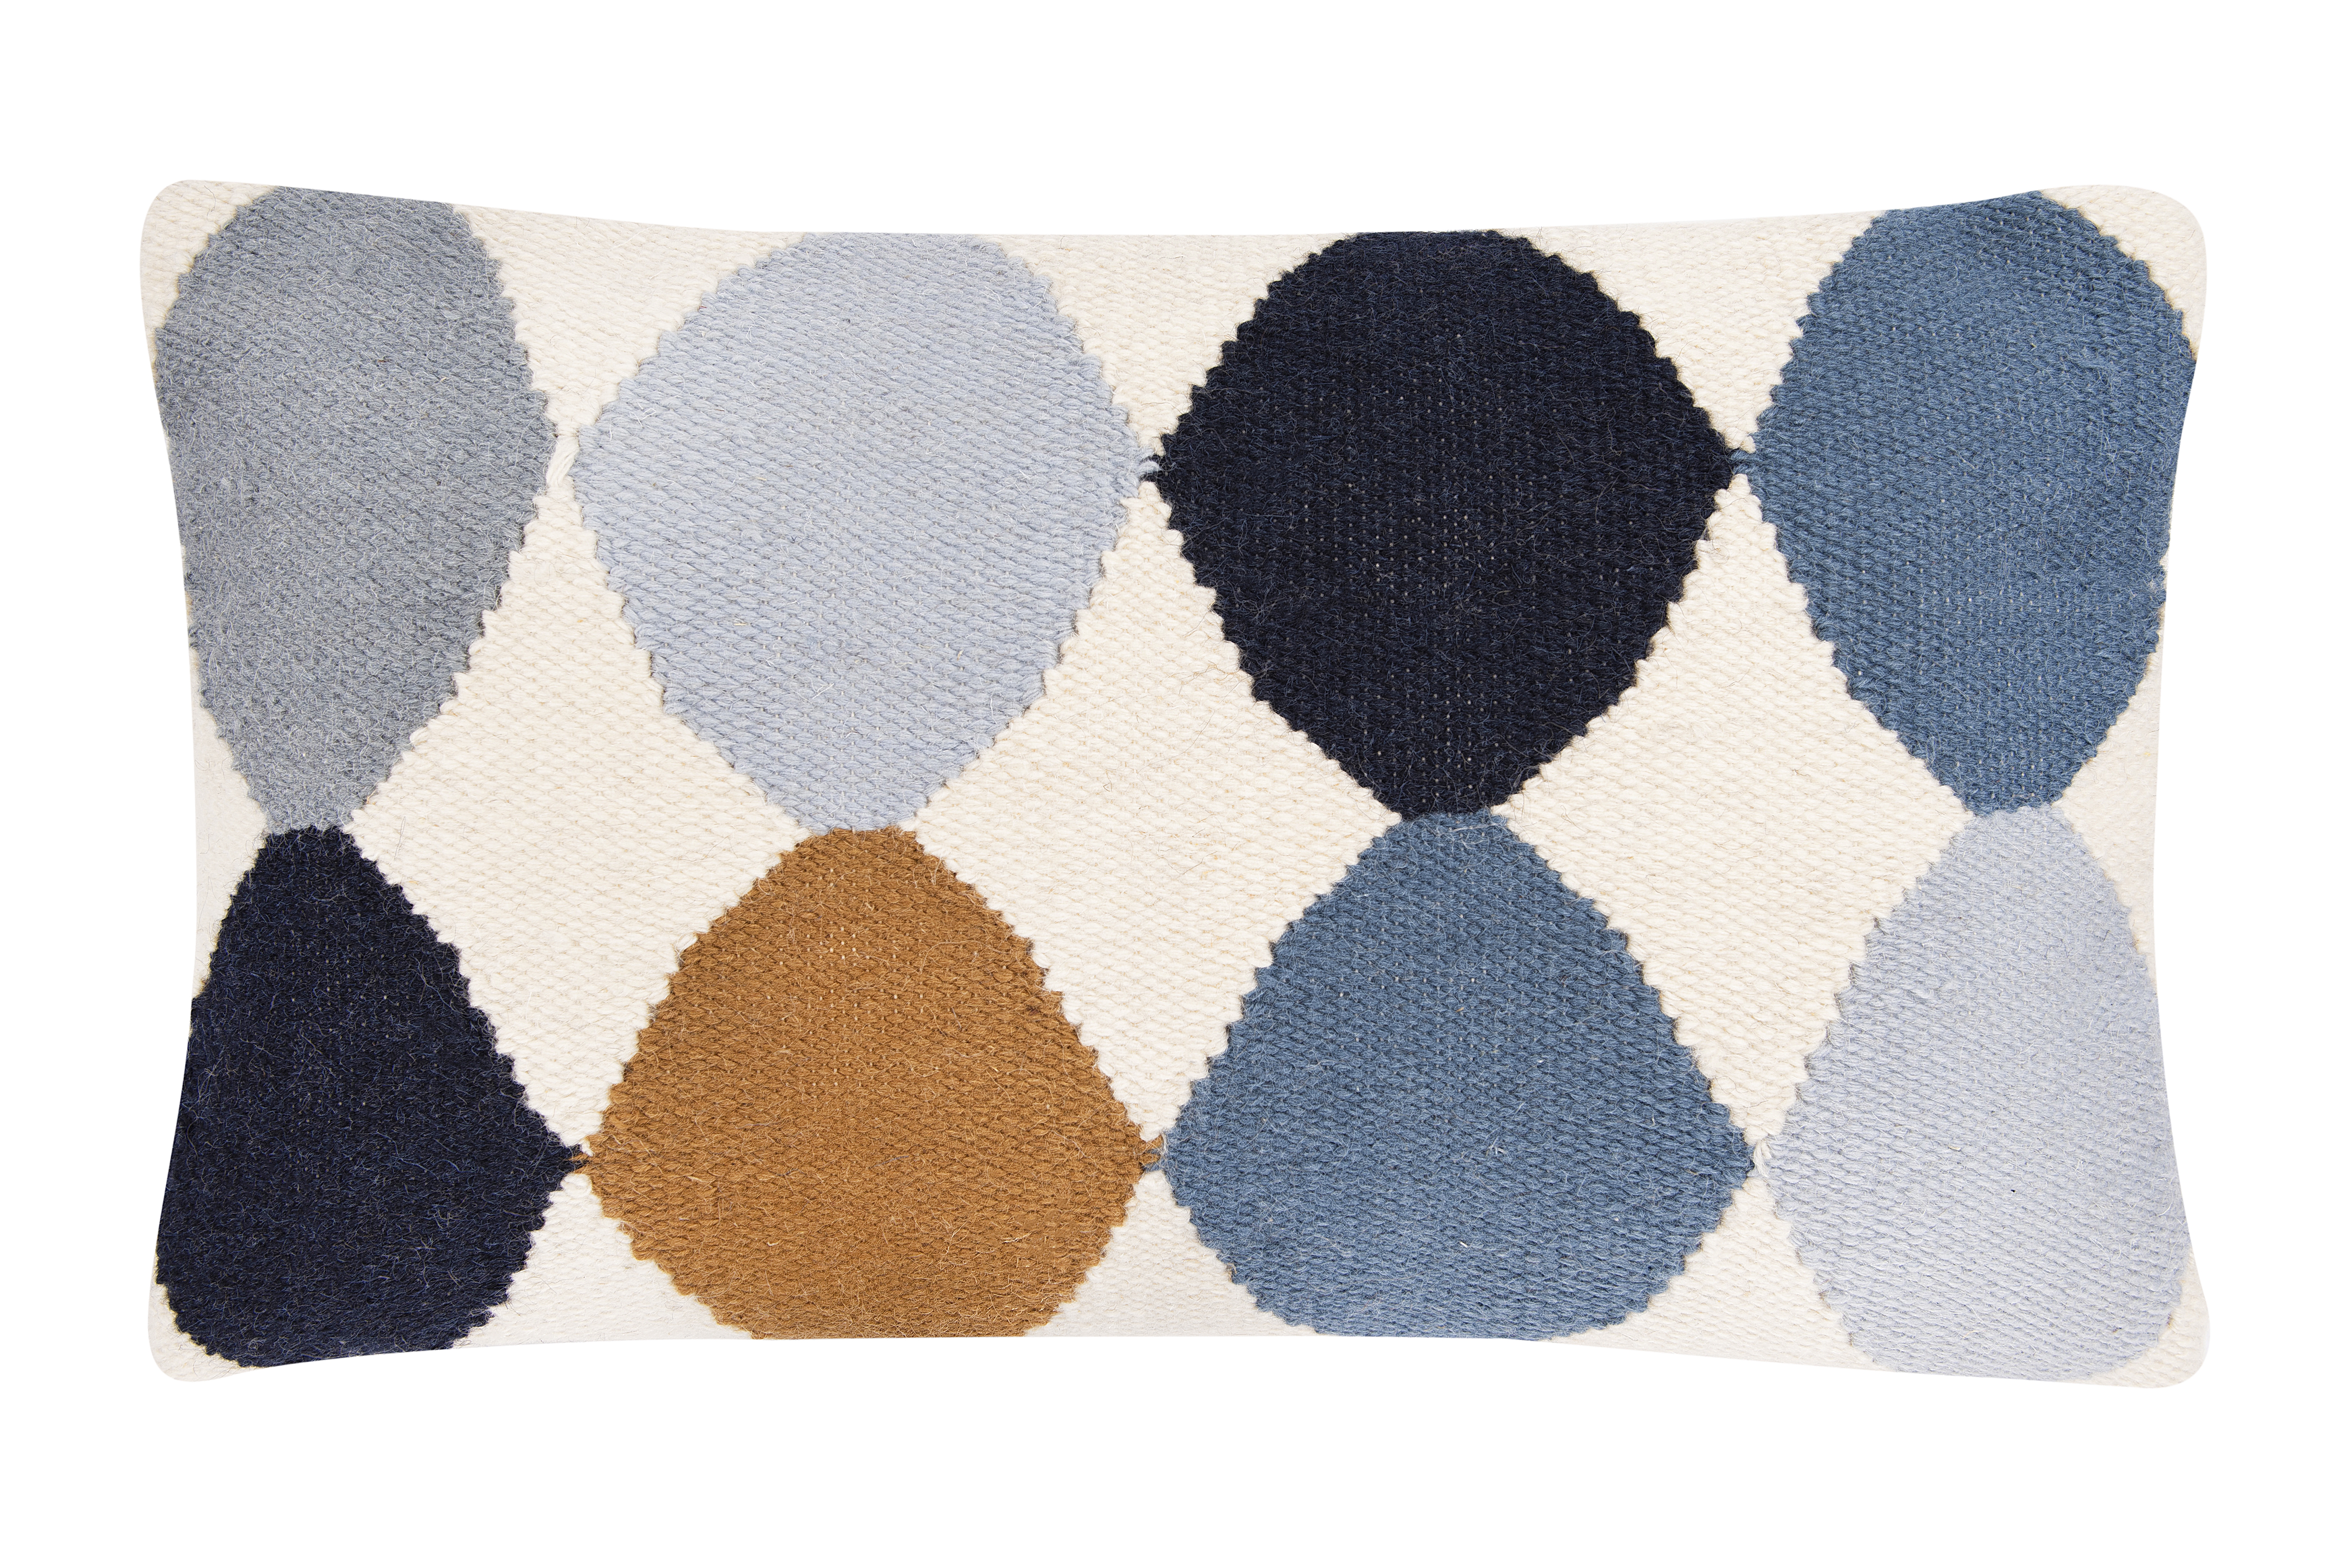 Wool Blend Lumbar Pillow with Pattern, Off-White, Blue & Brown, 26" x 16" - Image 0